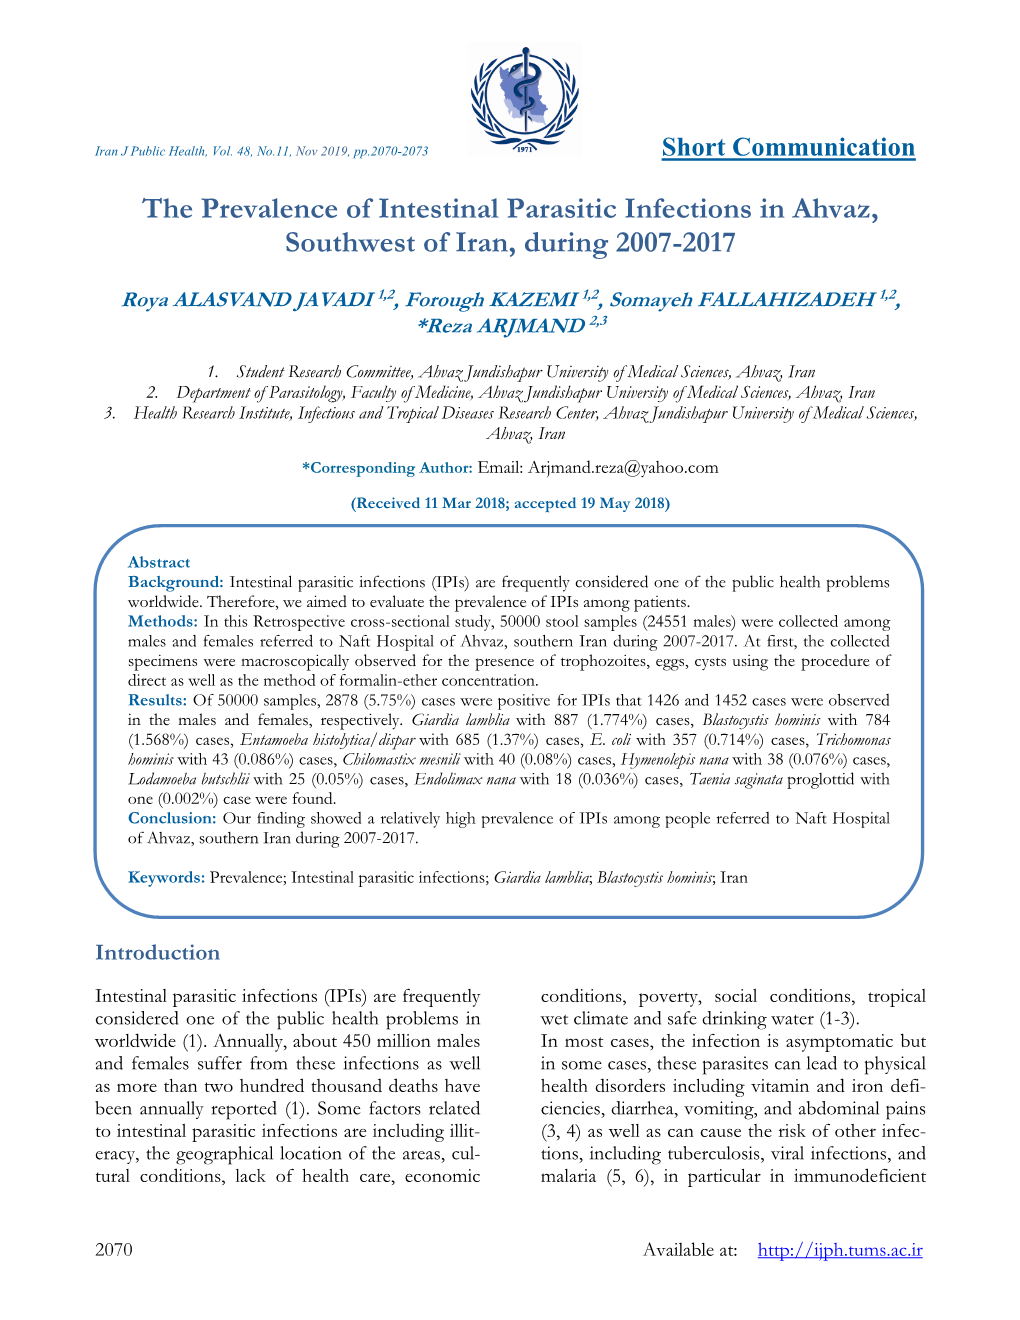 The Prevalence of Intestinal Parasitic Infections in Ahvaz, Southwest of Iran, During 2007-2017